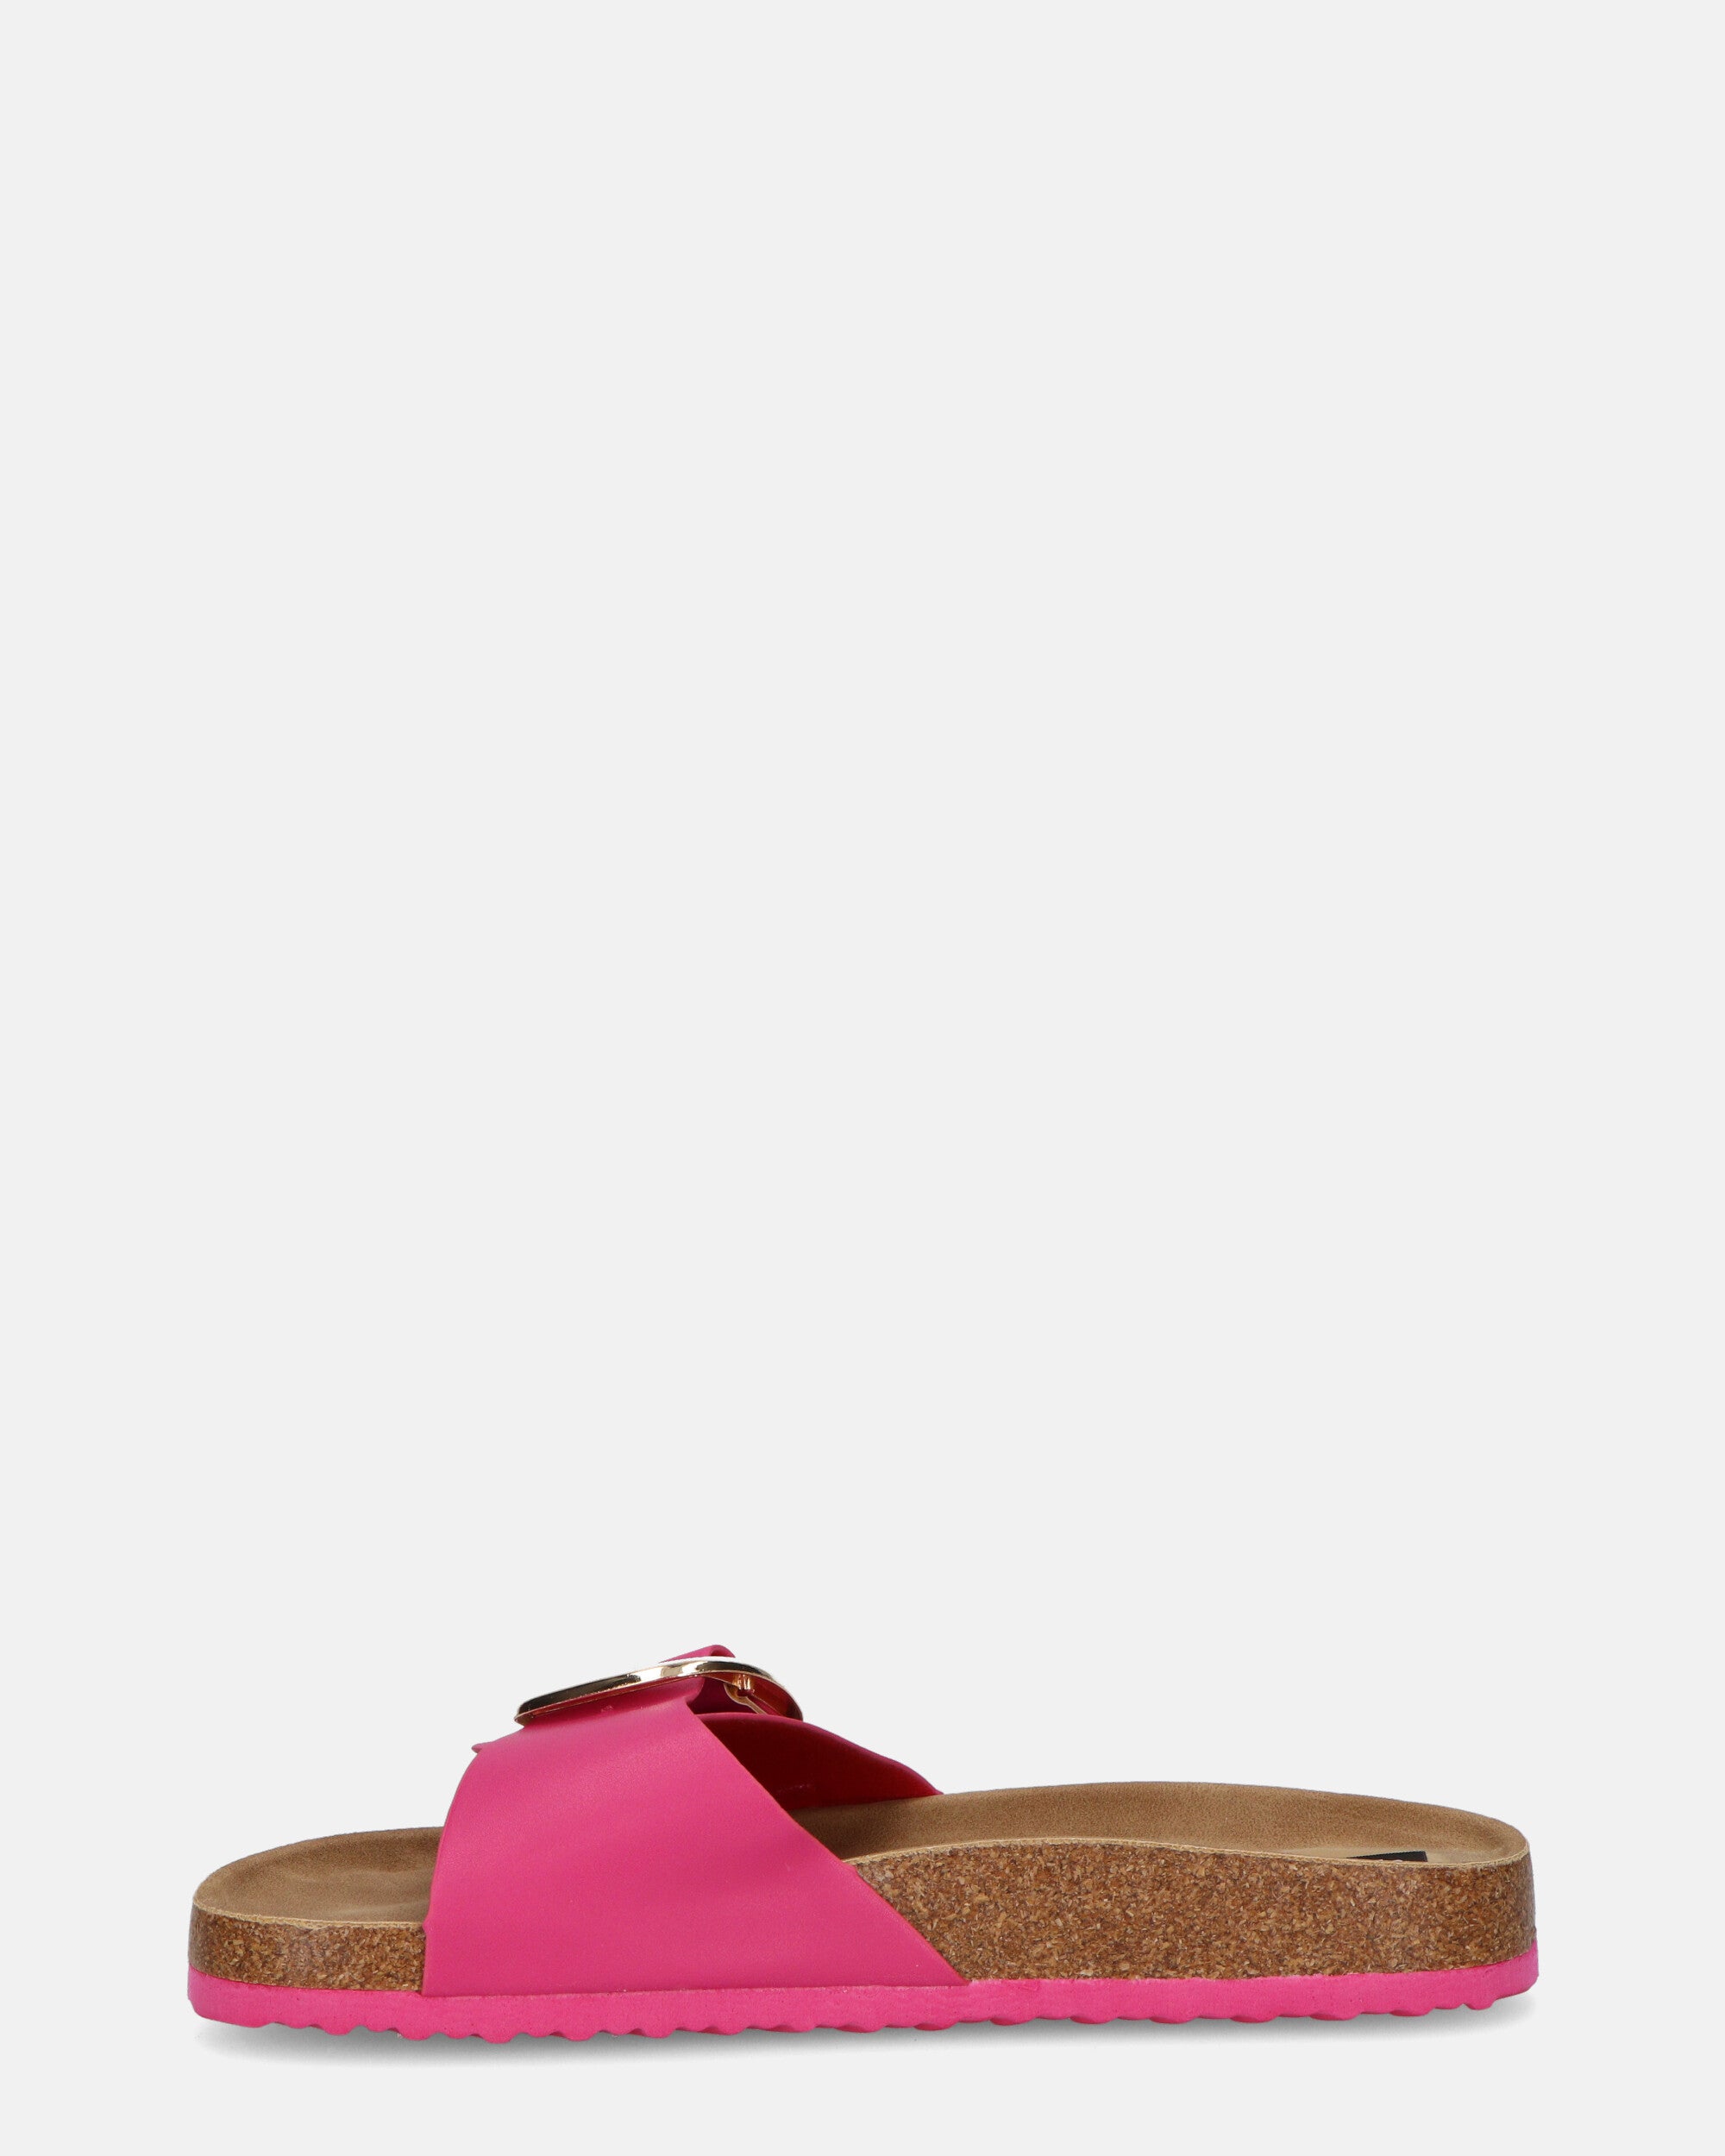 LENA - sandals with cork sole and fuchsia band